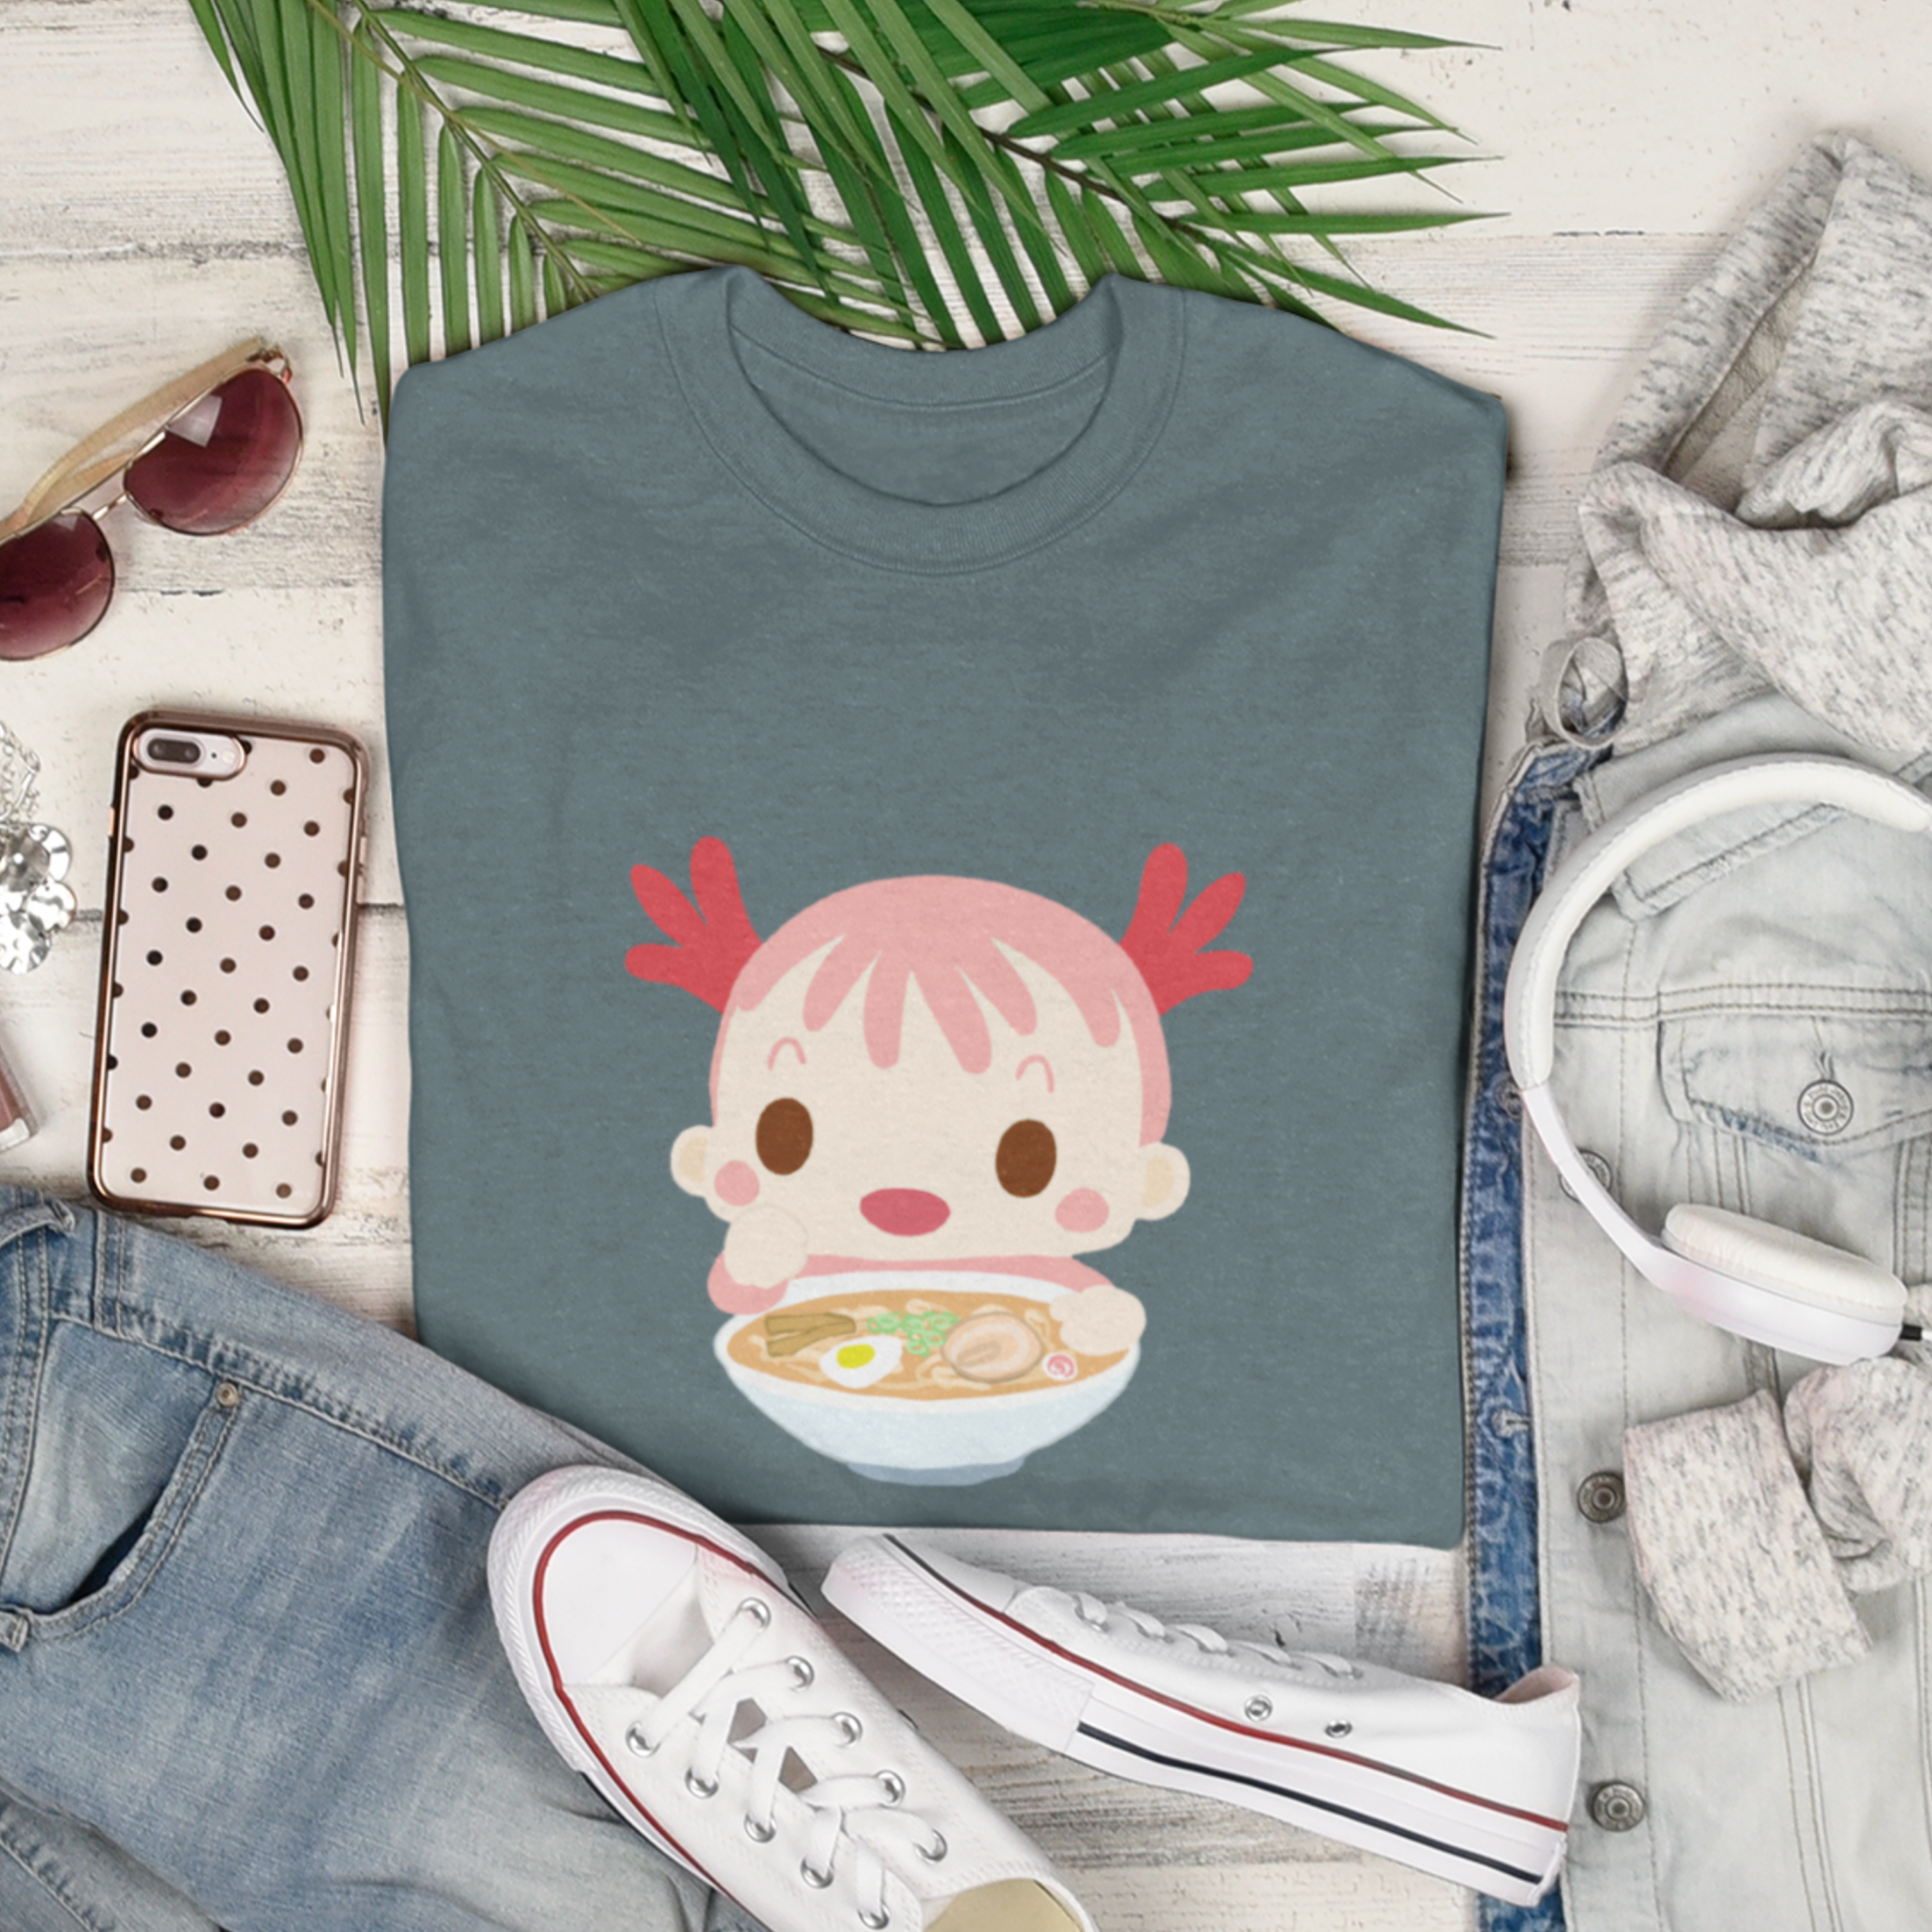 Ramen T-Shirt with Axolotl Illustration: Cute and Quirky Japanese Shirt for Foodie, Ramen Art Lover, Unique and Playful Design